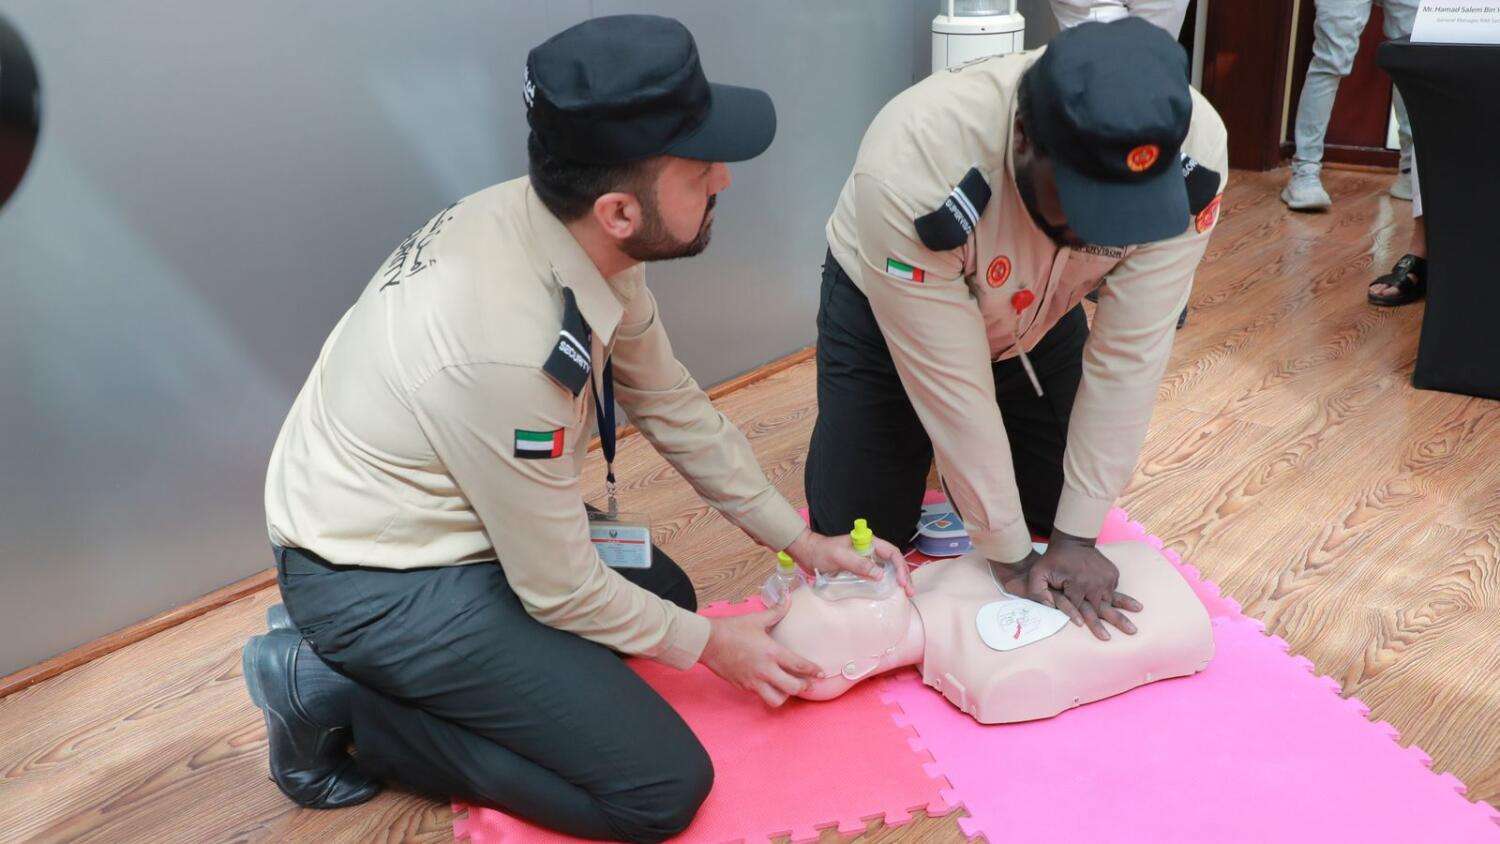 CPR in a basic life support training